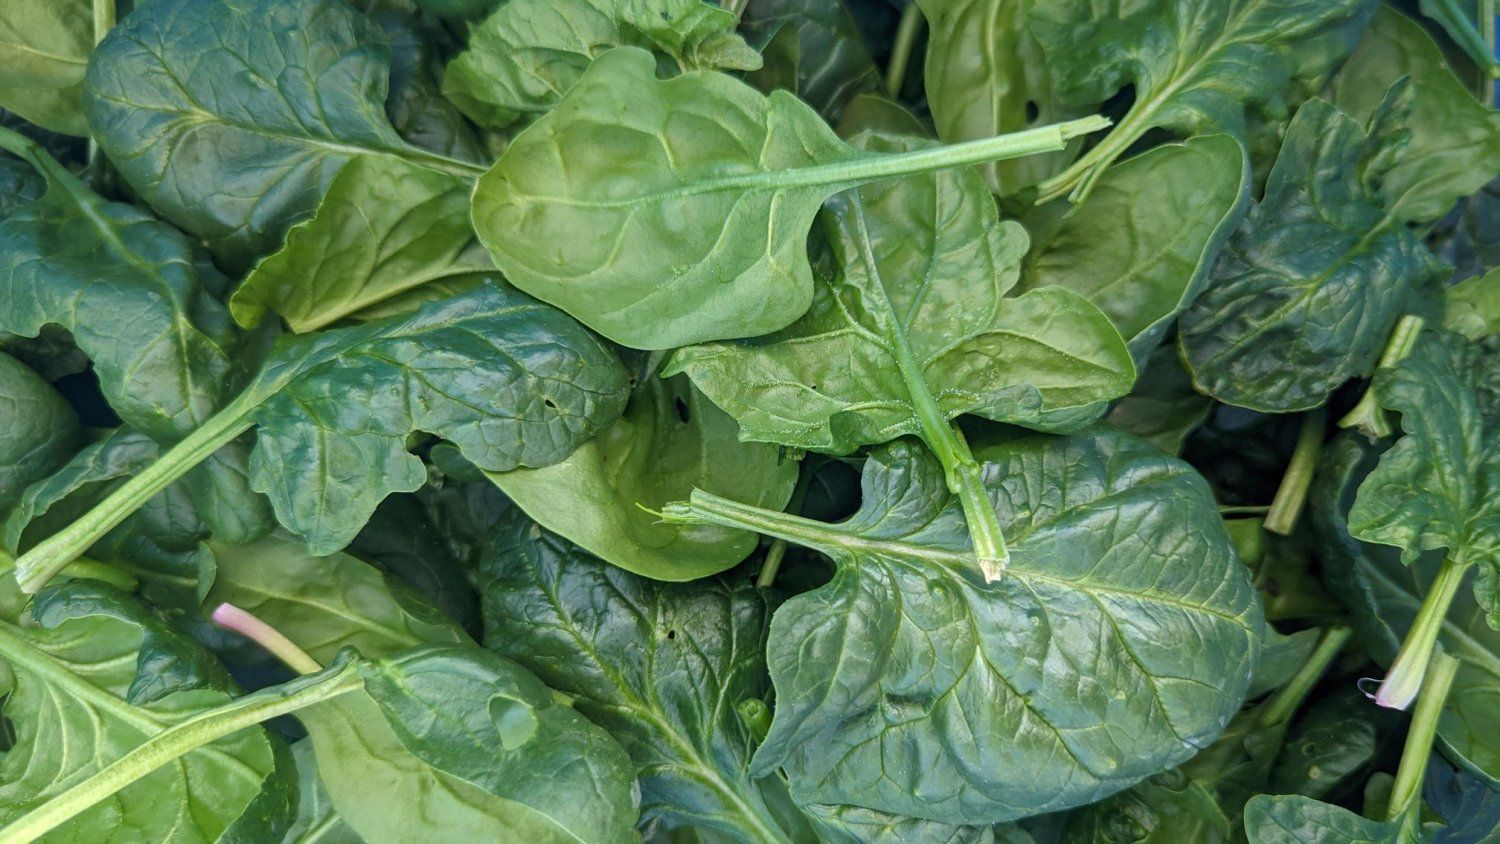 Next Happening: SPINACH SALE! Order by Wednesday at midnight, pick up Thursday, February 29th.